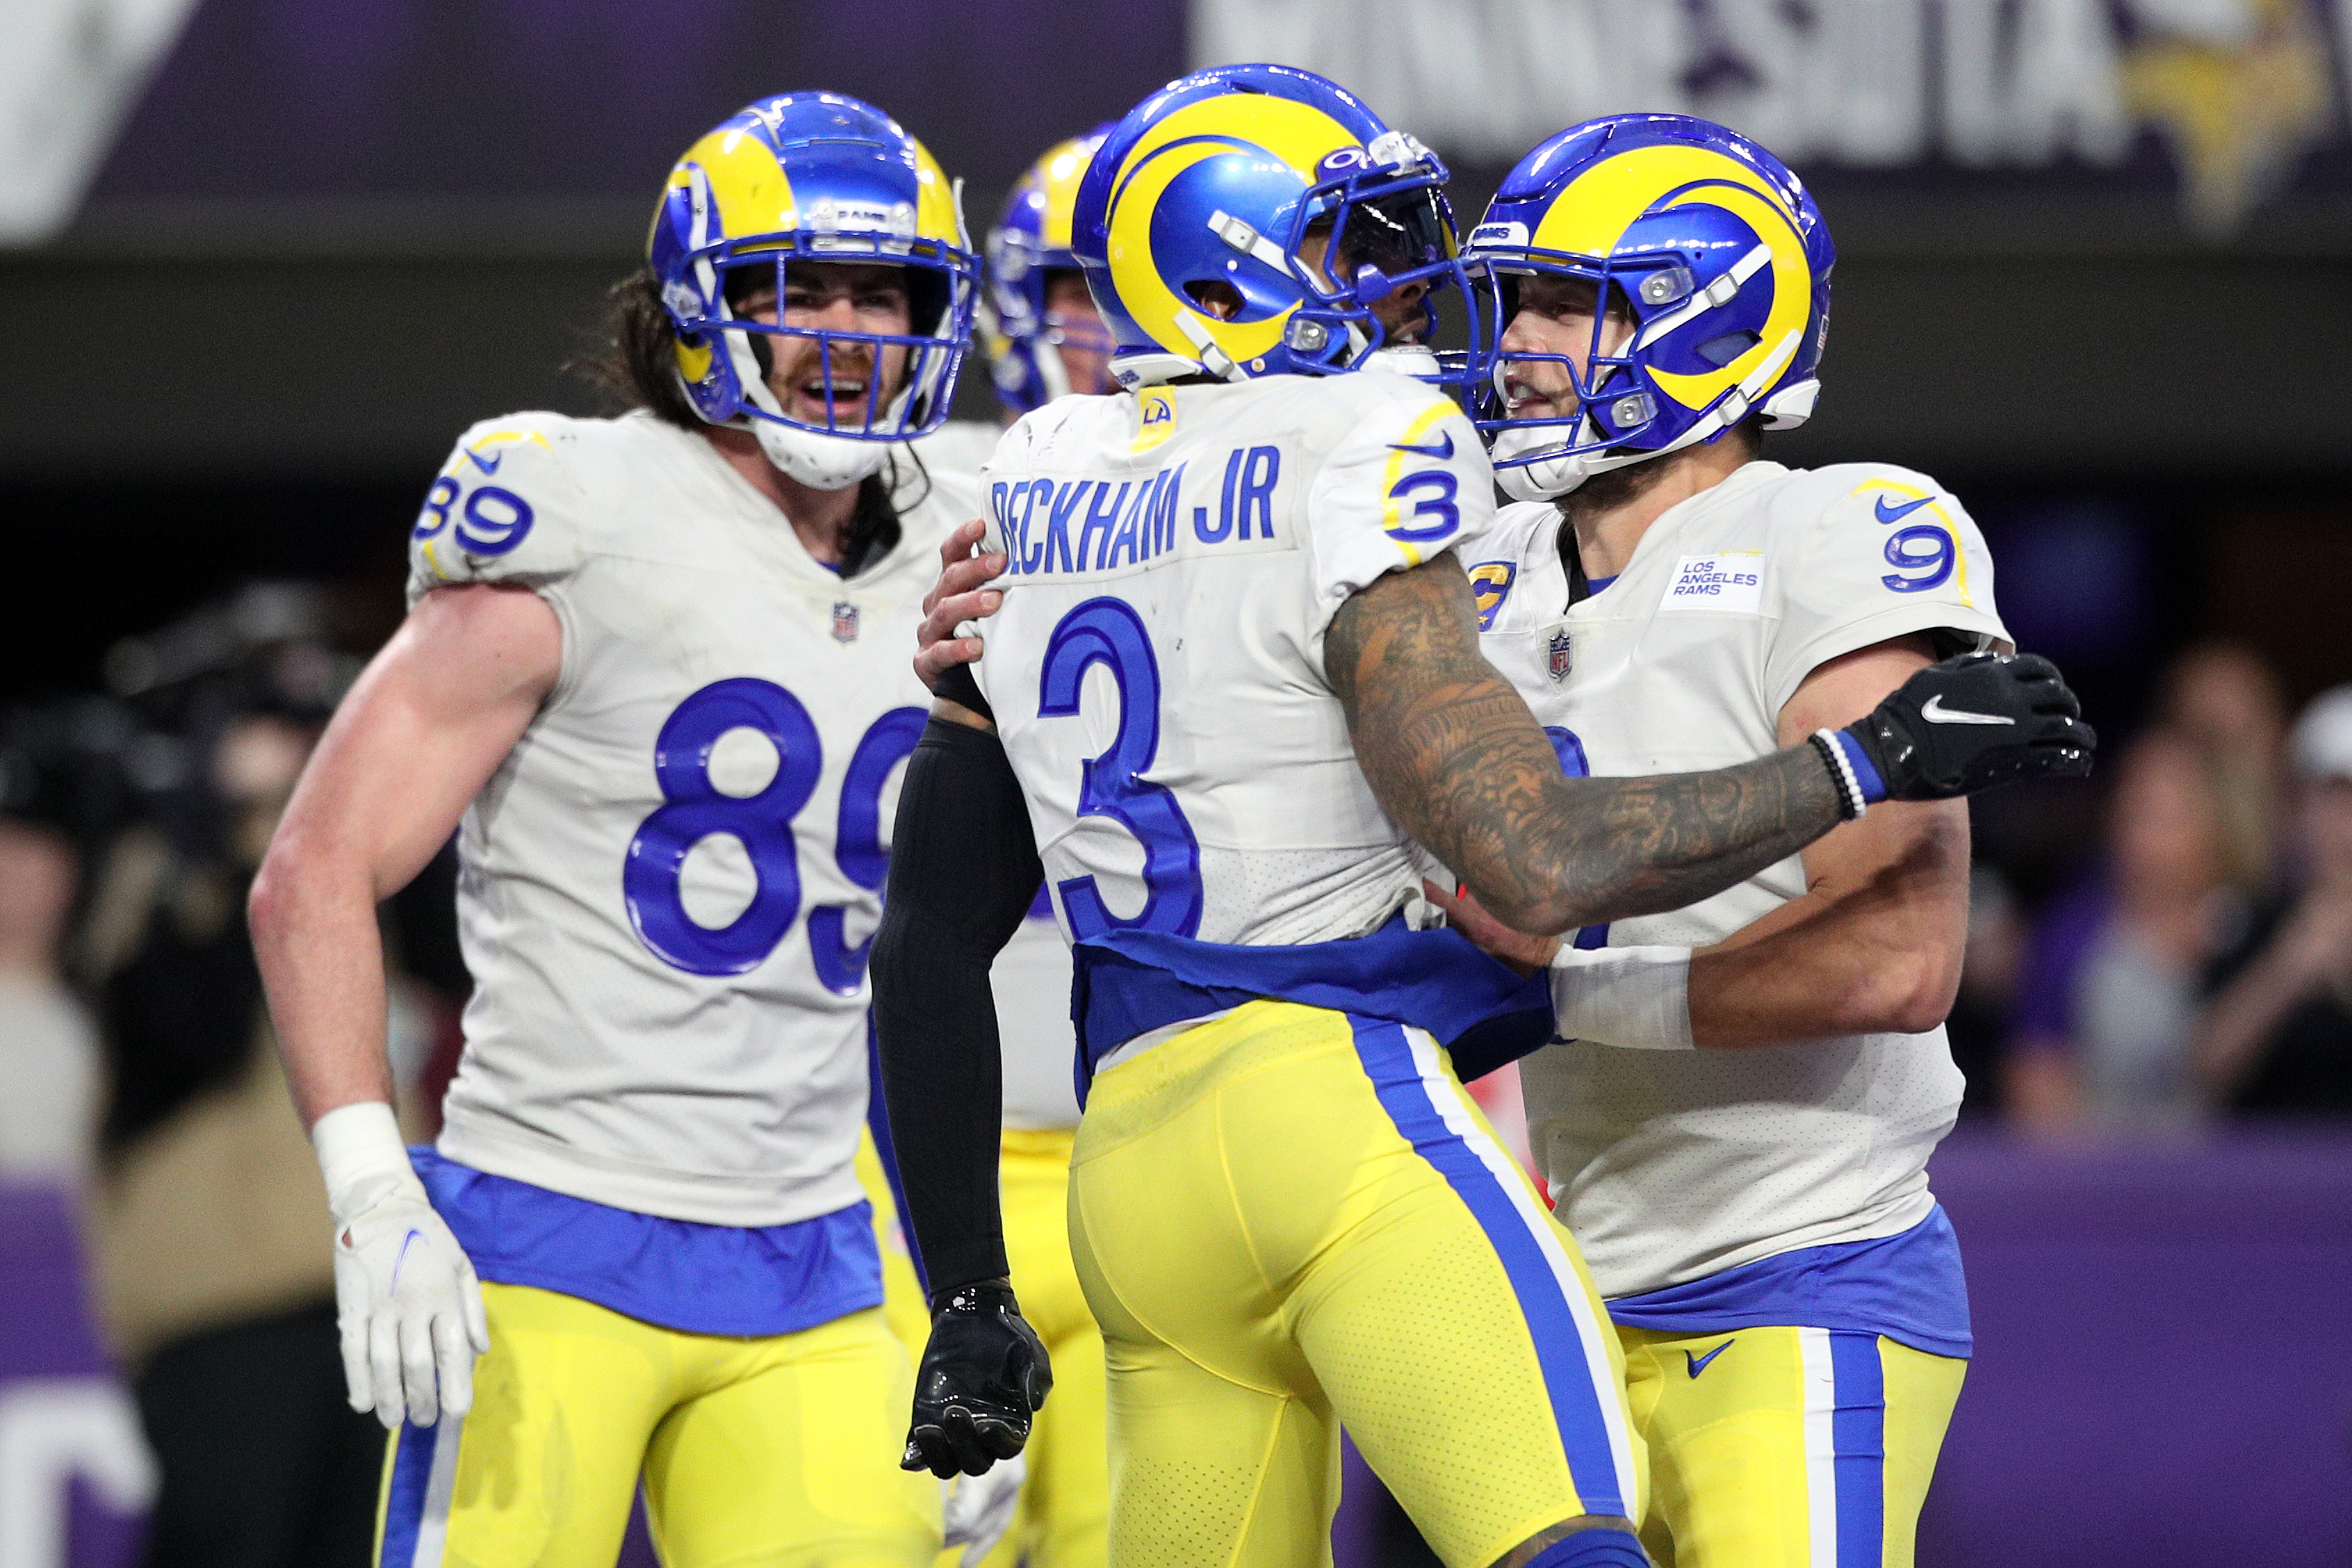 The Rams can clinch the NFC West title in Week 17